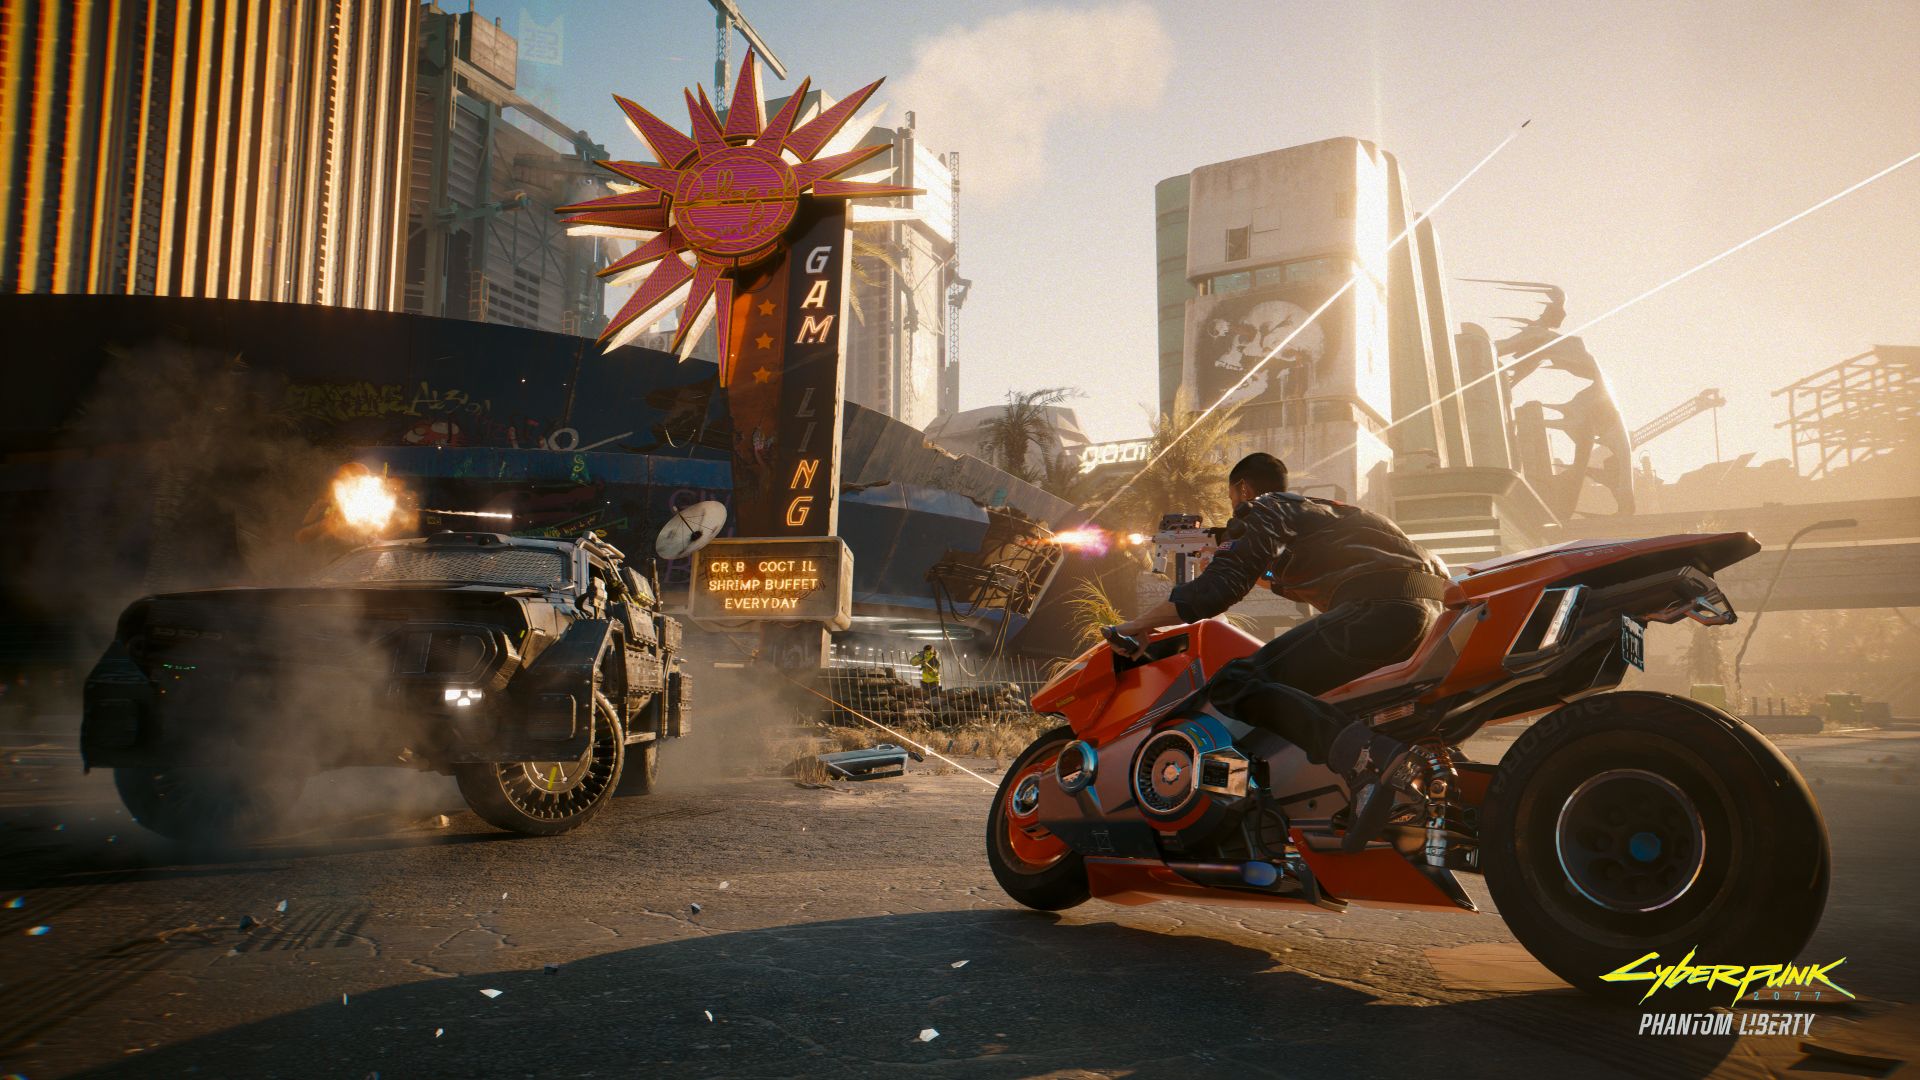 Cyberpunk 2077: Phantom Liberty Features Easter Egg Referencing The Witcher 3: Wild Hunt